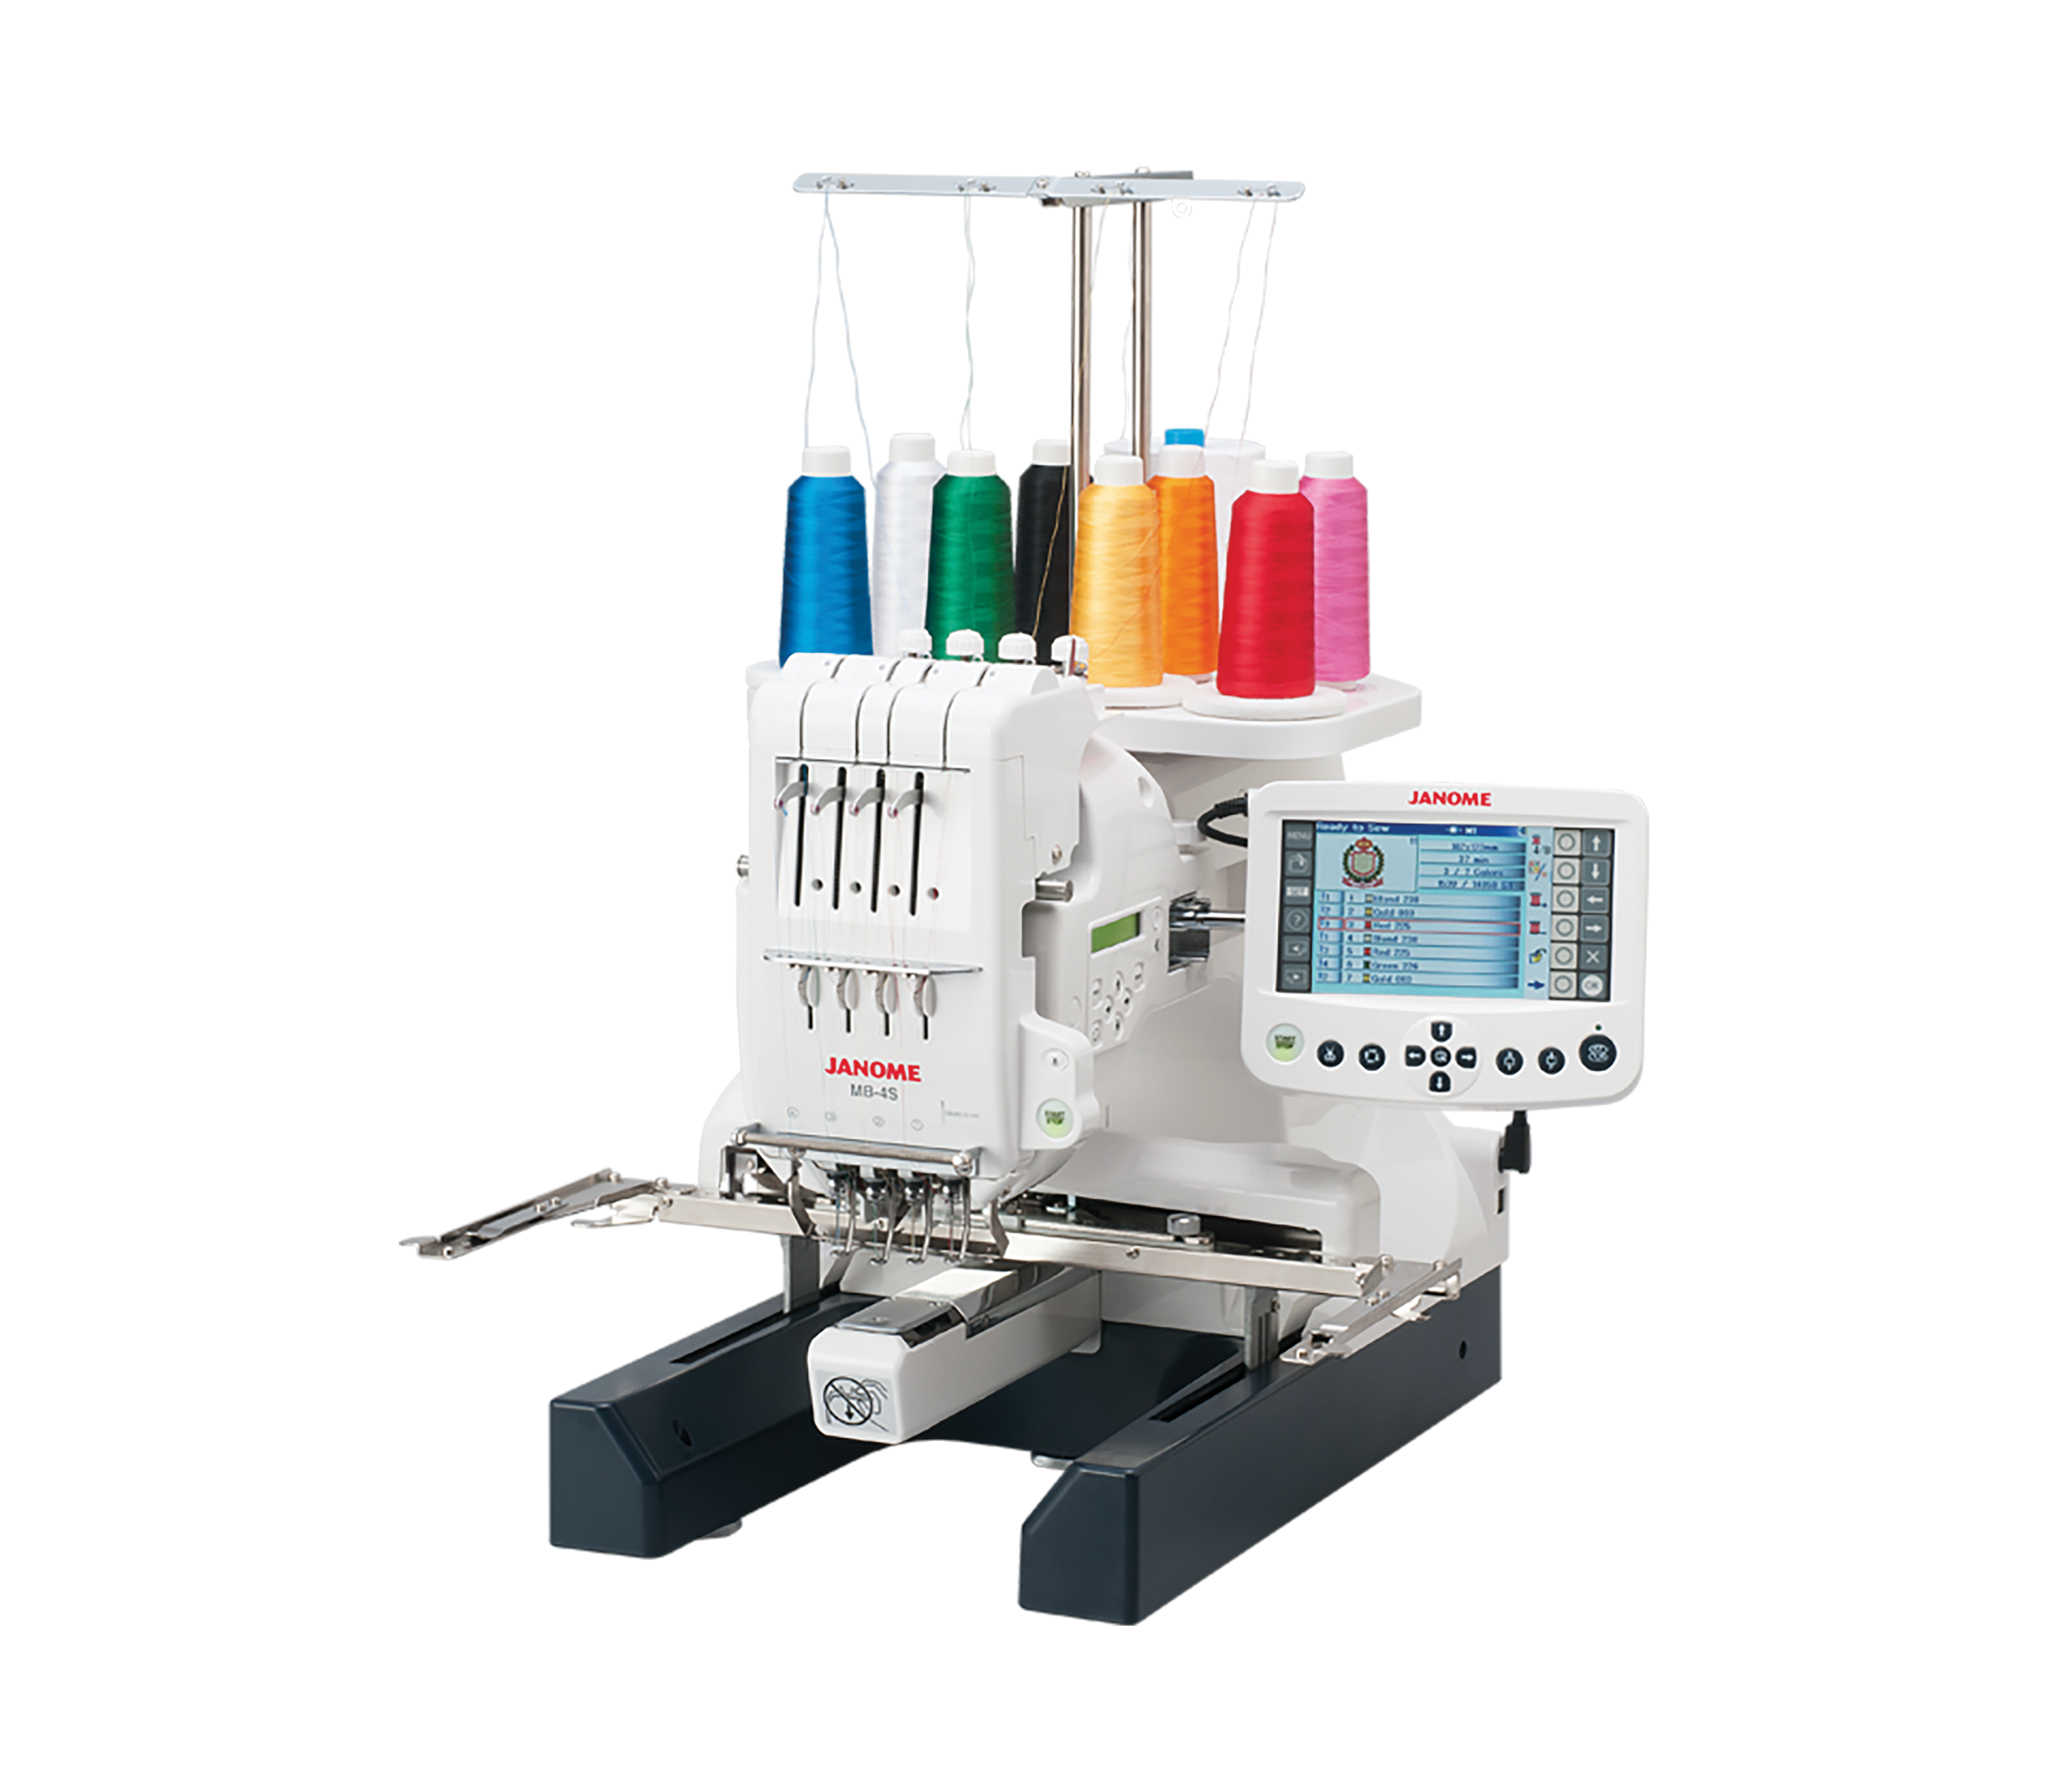 Janome MB4S Four Needle Embroidery Machine 9.5x7.9